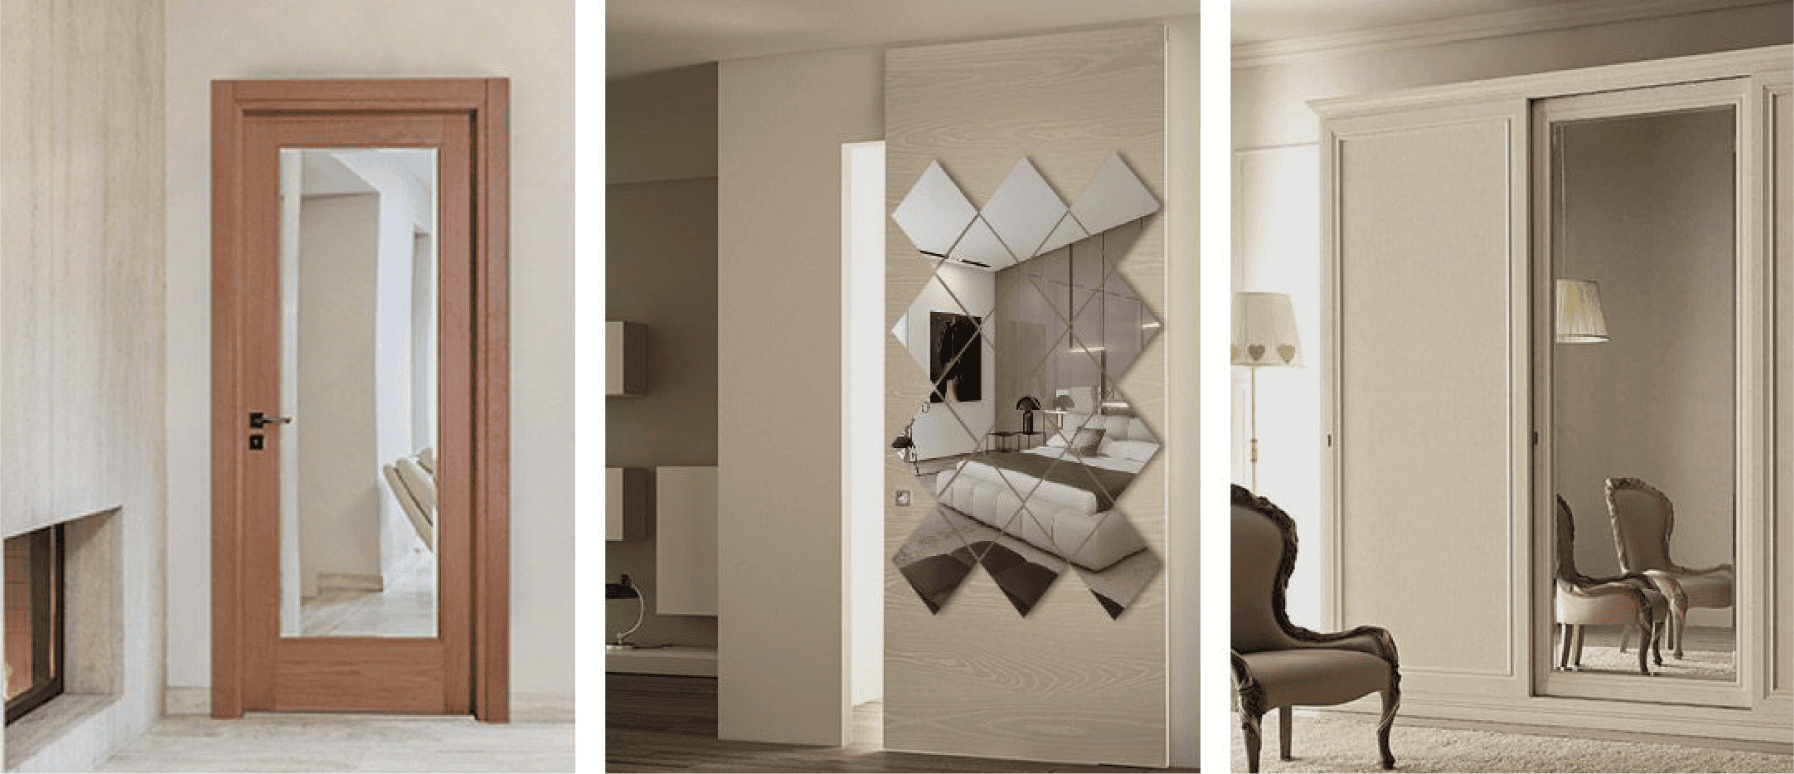 Rooms featuring custom mirrors, each reflecting the beauty of its surroundings with style.